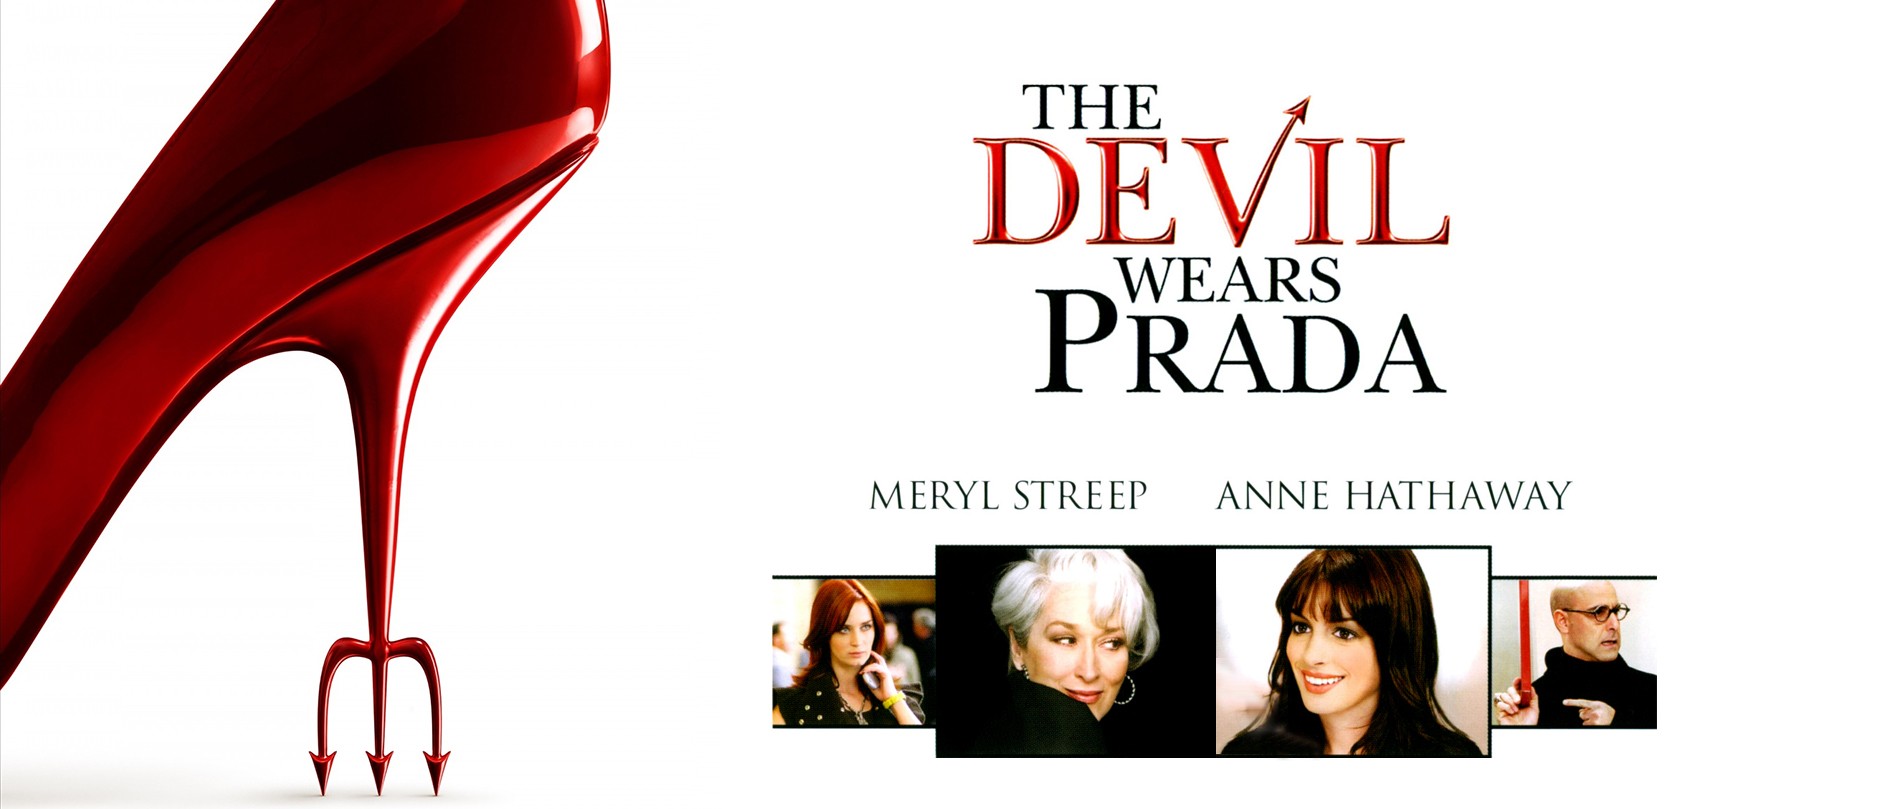 The 250: Fashion Issue! The Devil Wears Prada - The Georgetown Voice